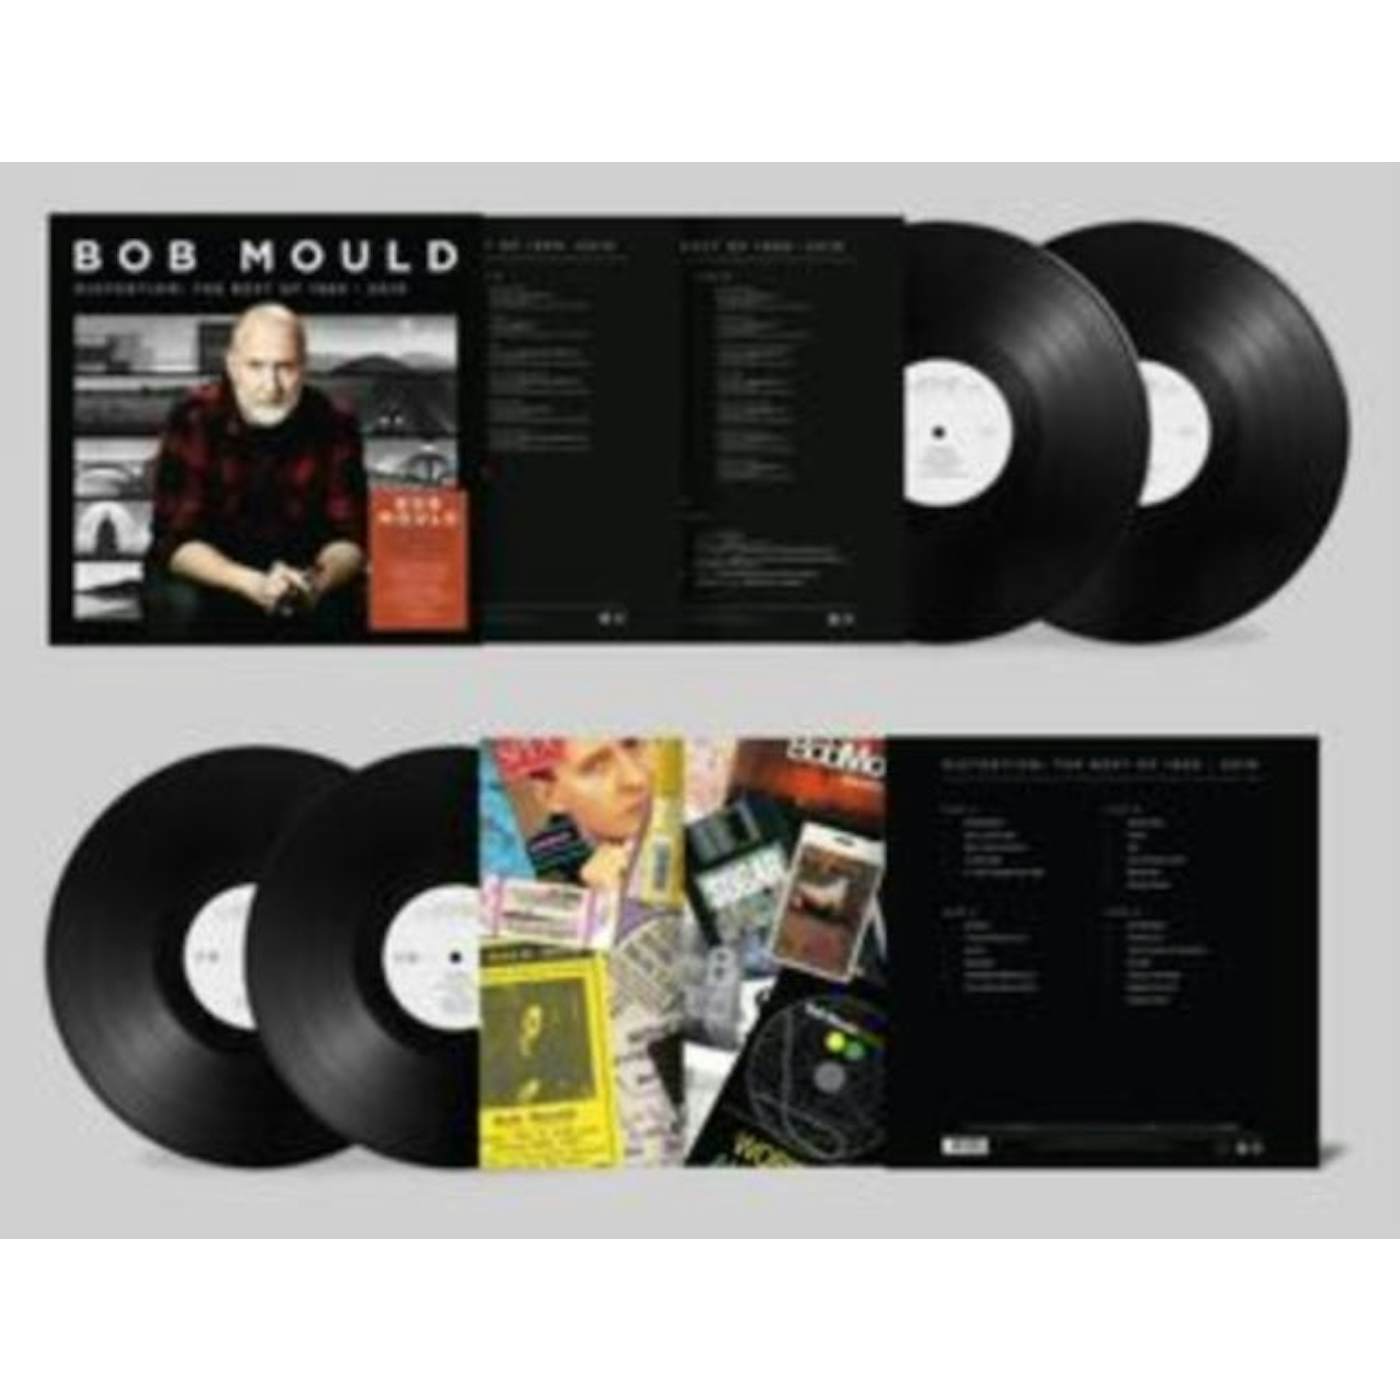 Bob Mould LP Vinyl Record - Distortion: The Best Of 19 89-20. 19